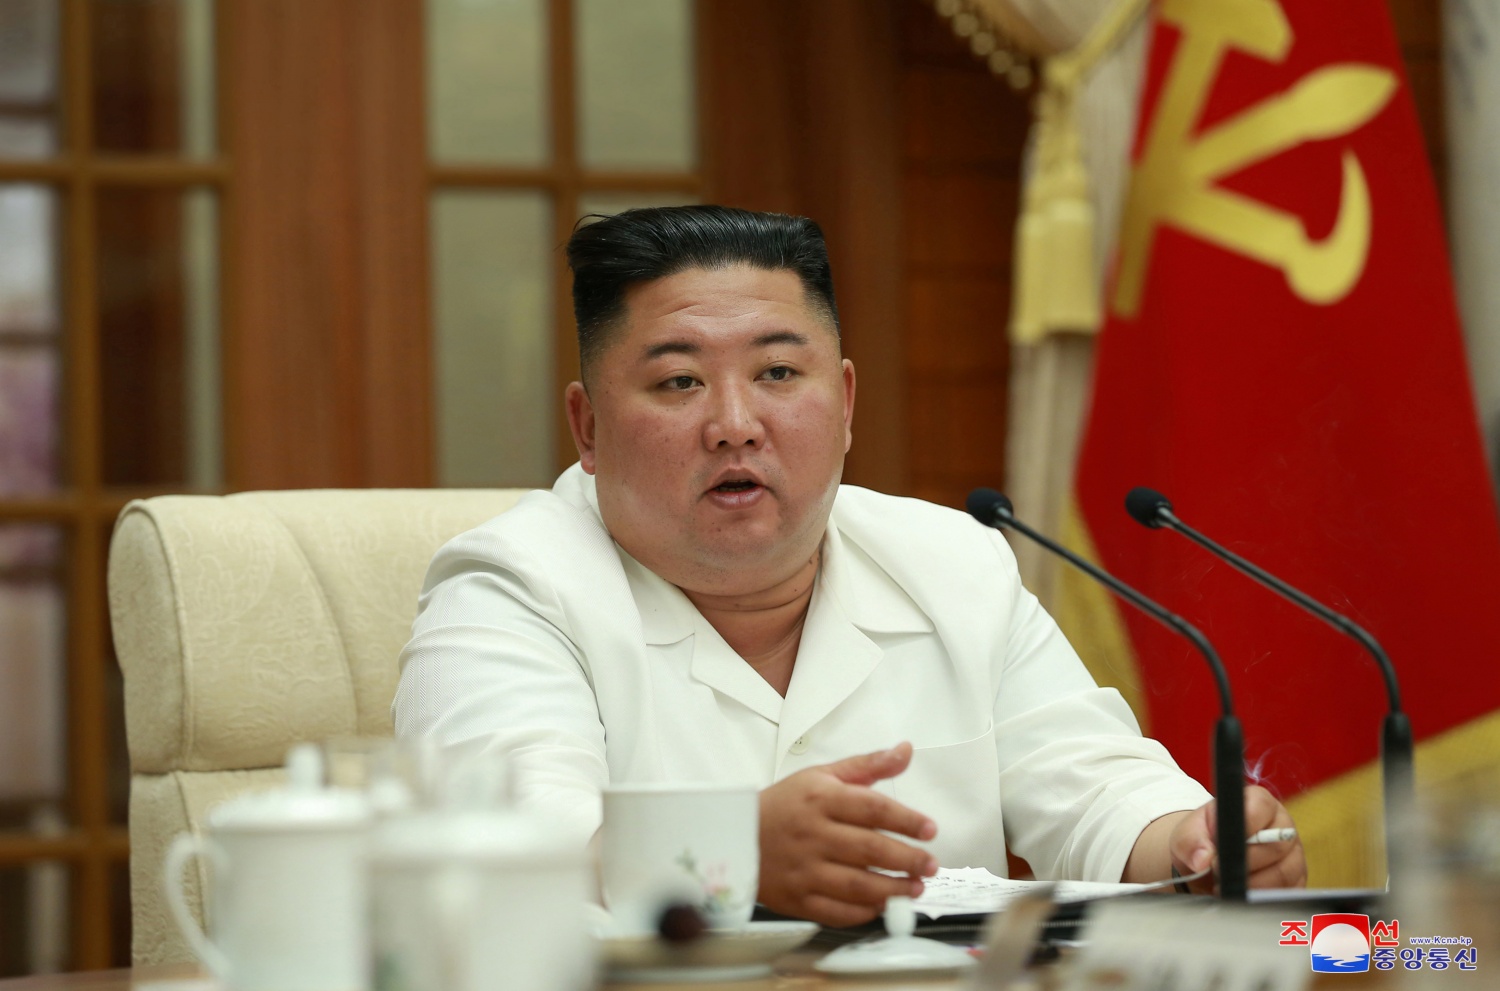 Kim Jong Un alive and well, South Korean official says 